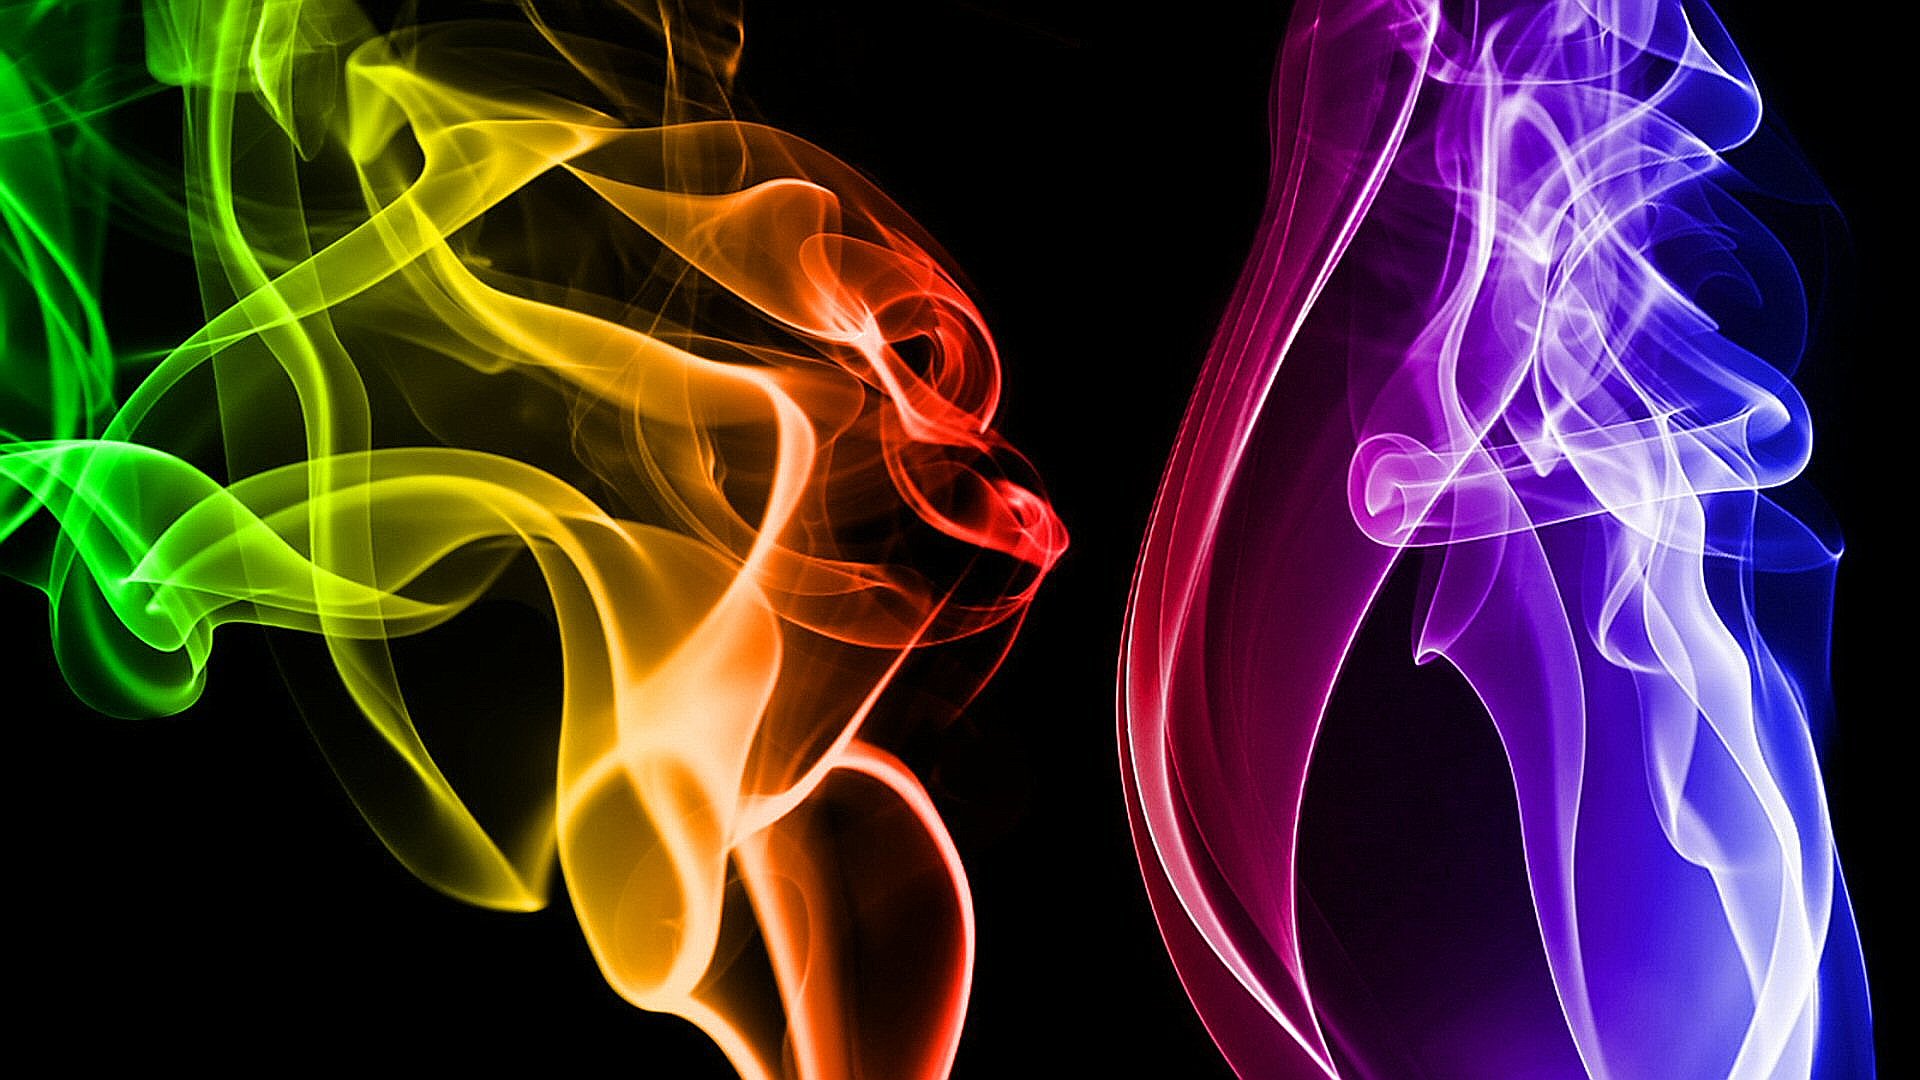 Neon colorful abstract smoke ppt slide hd download